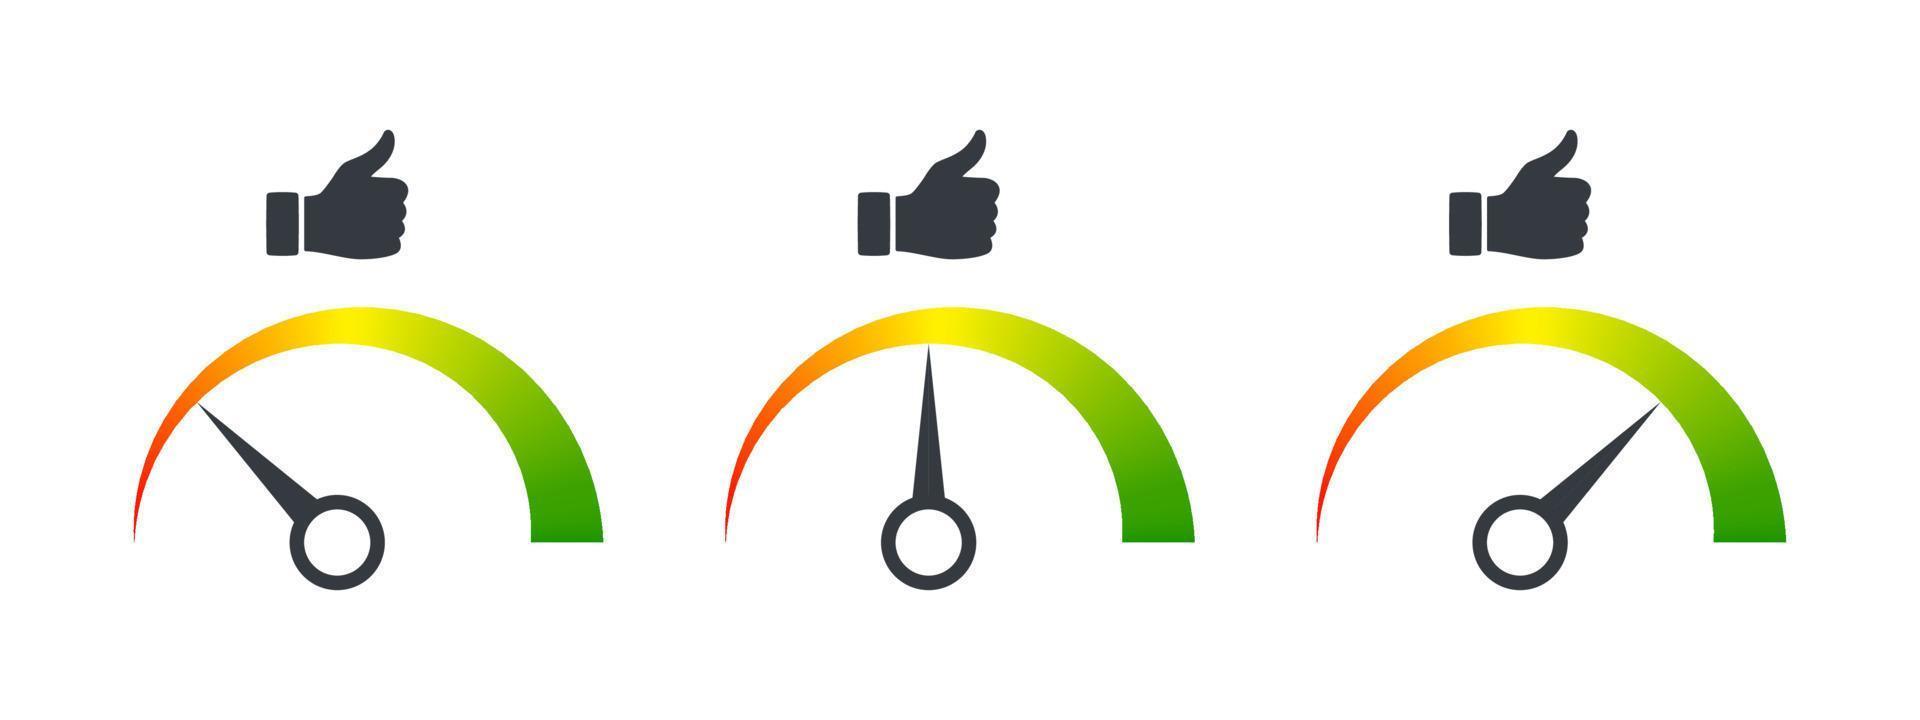 Rating scale. Service Rating signs. Service evaluation icons. Service satisfaction icons. Vector icons